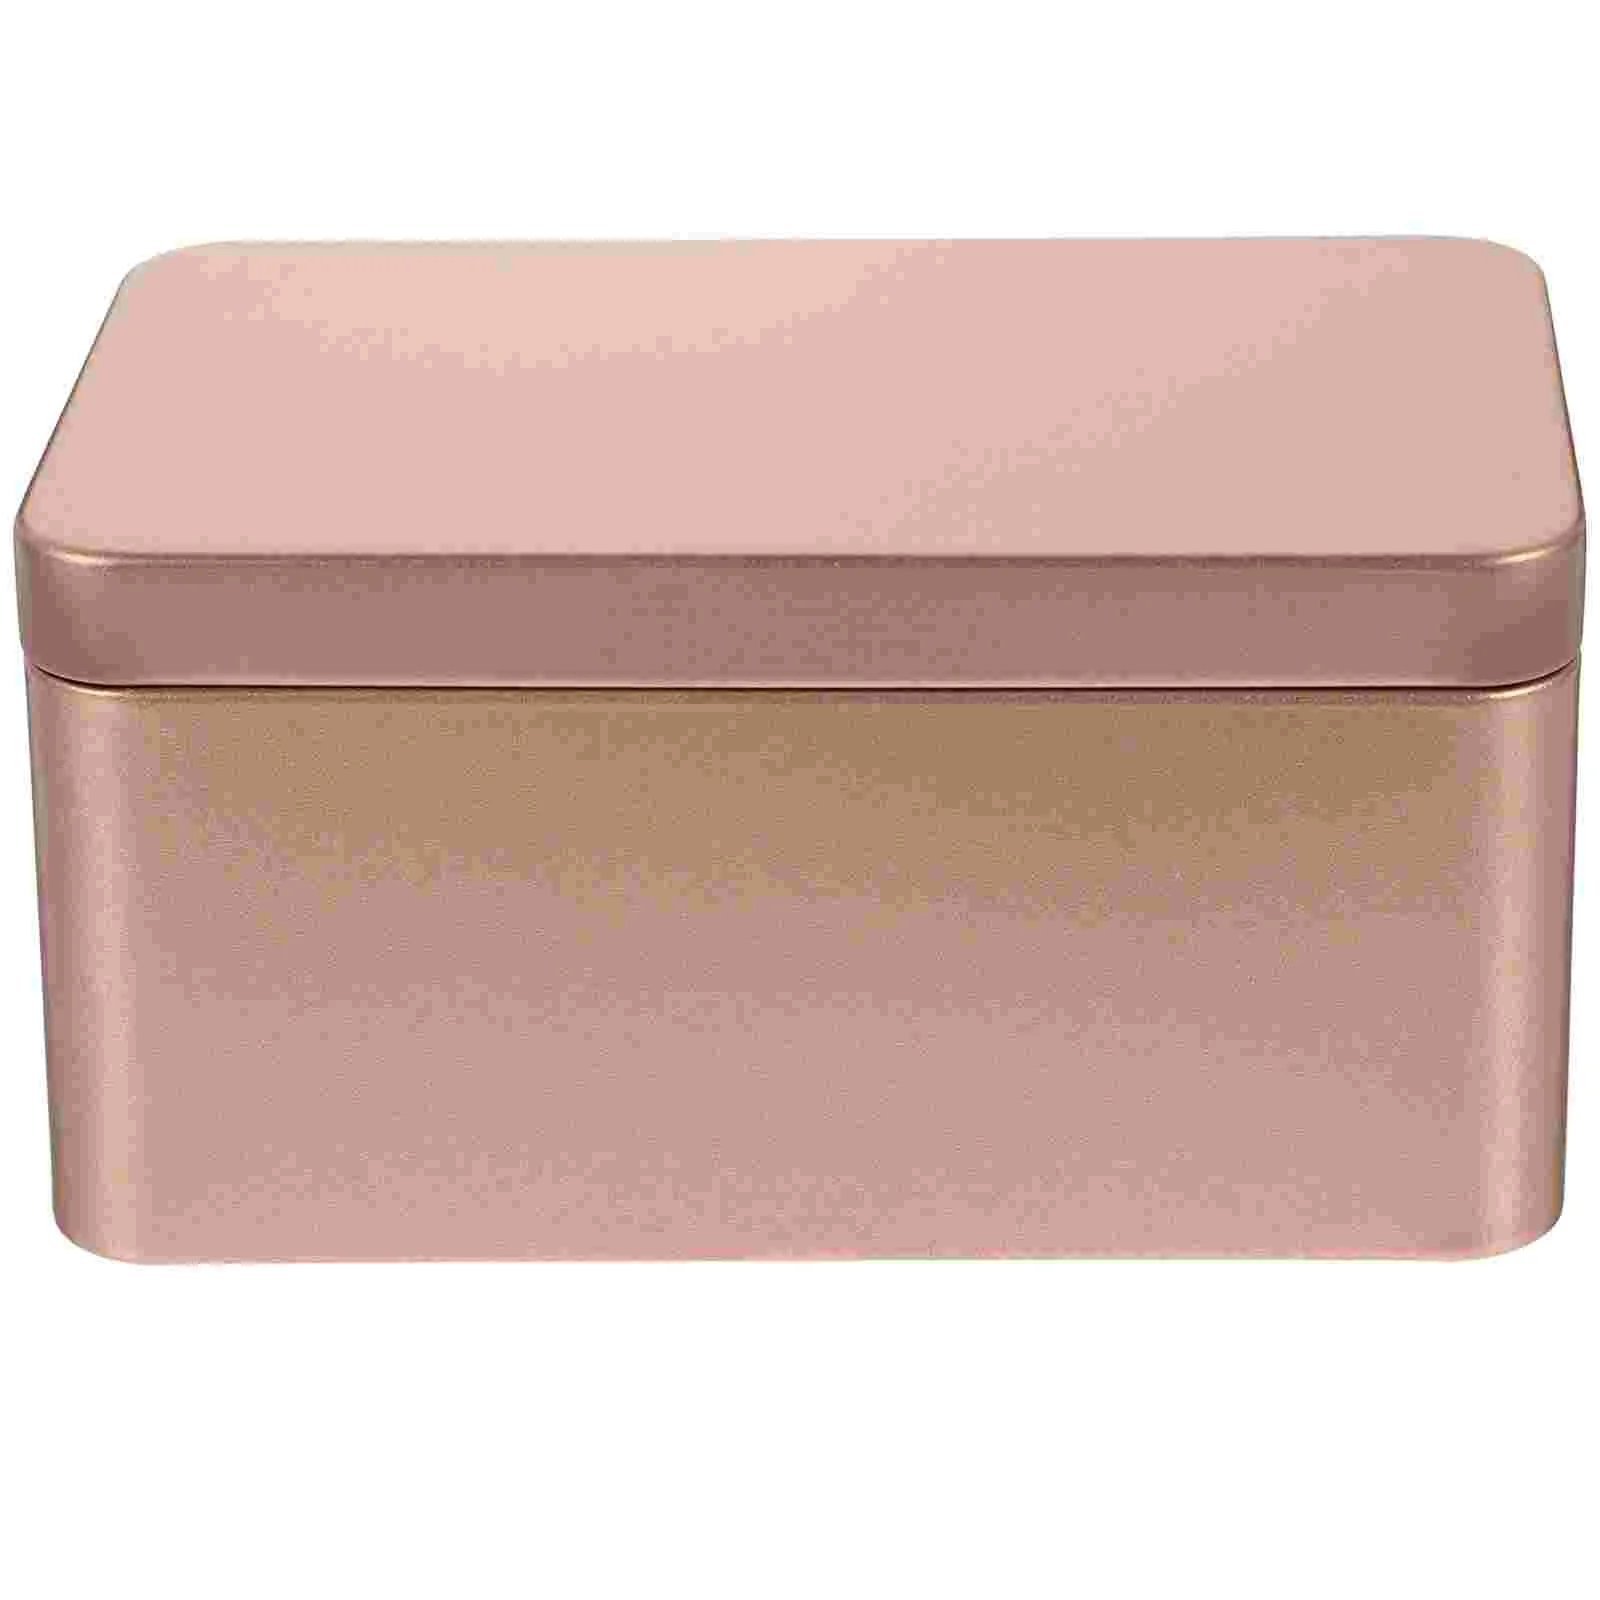 

Tin Box Storage Metal Tea Tins Container Empty Lid Lids Rectangular Containers Canister Candy Organizer Tinplate Coffee Cookie